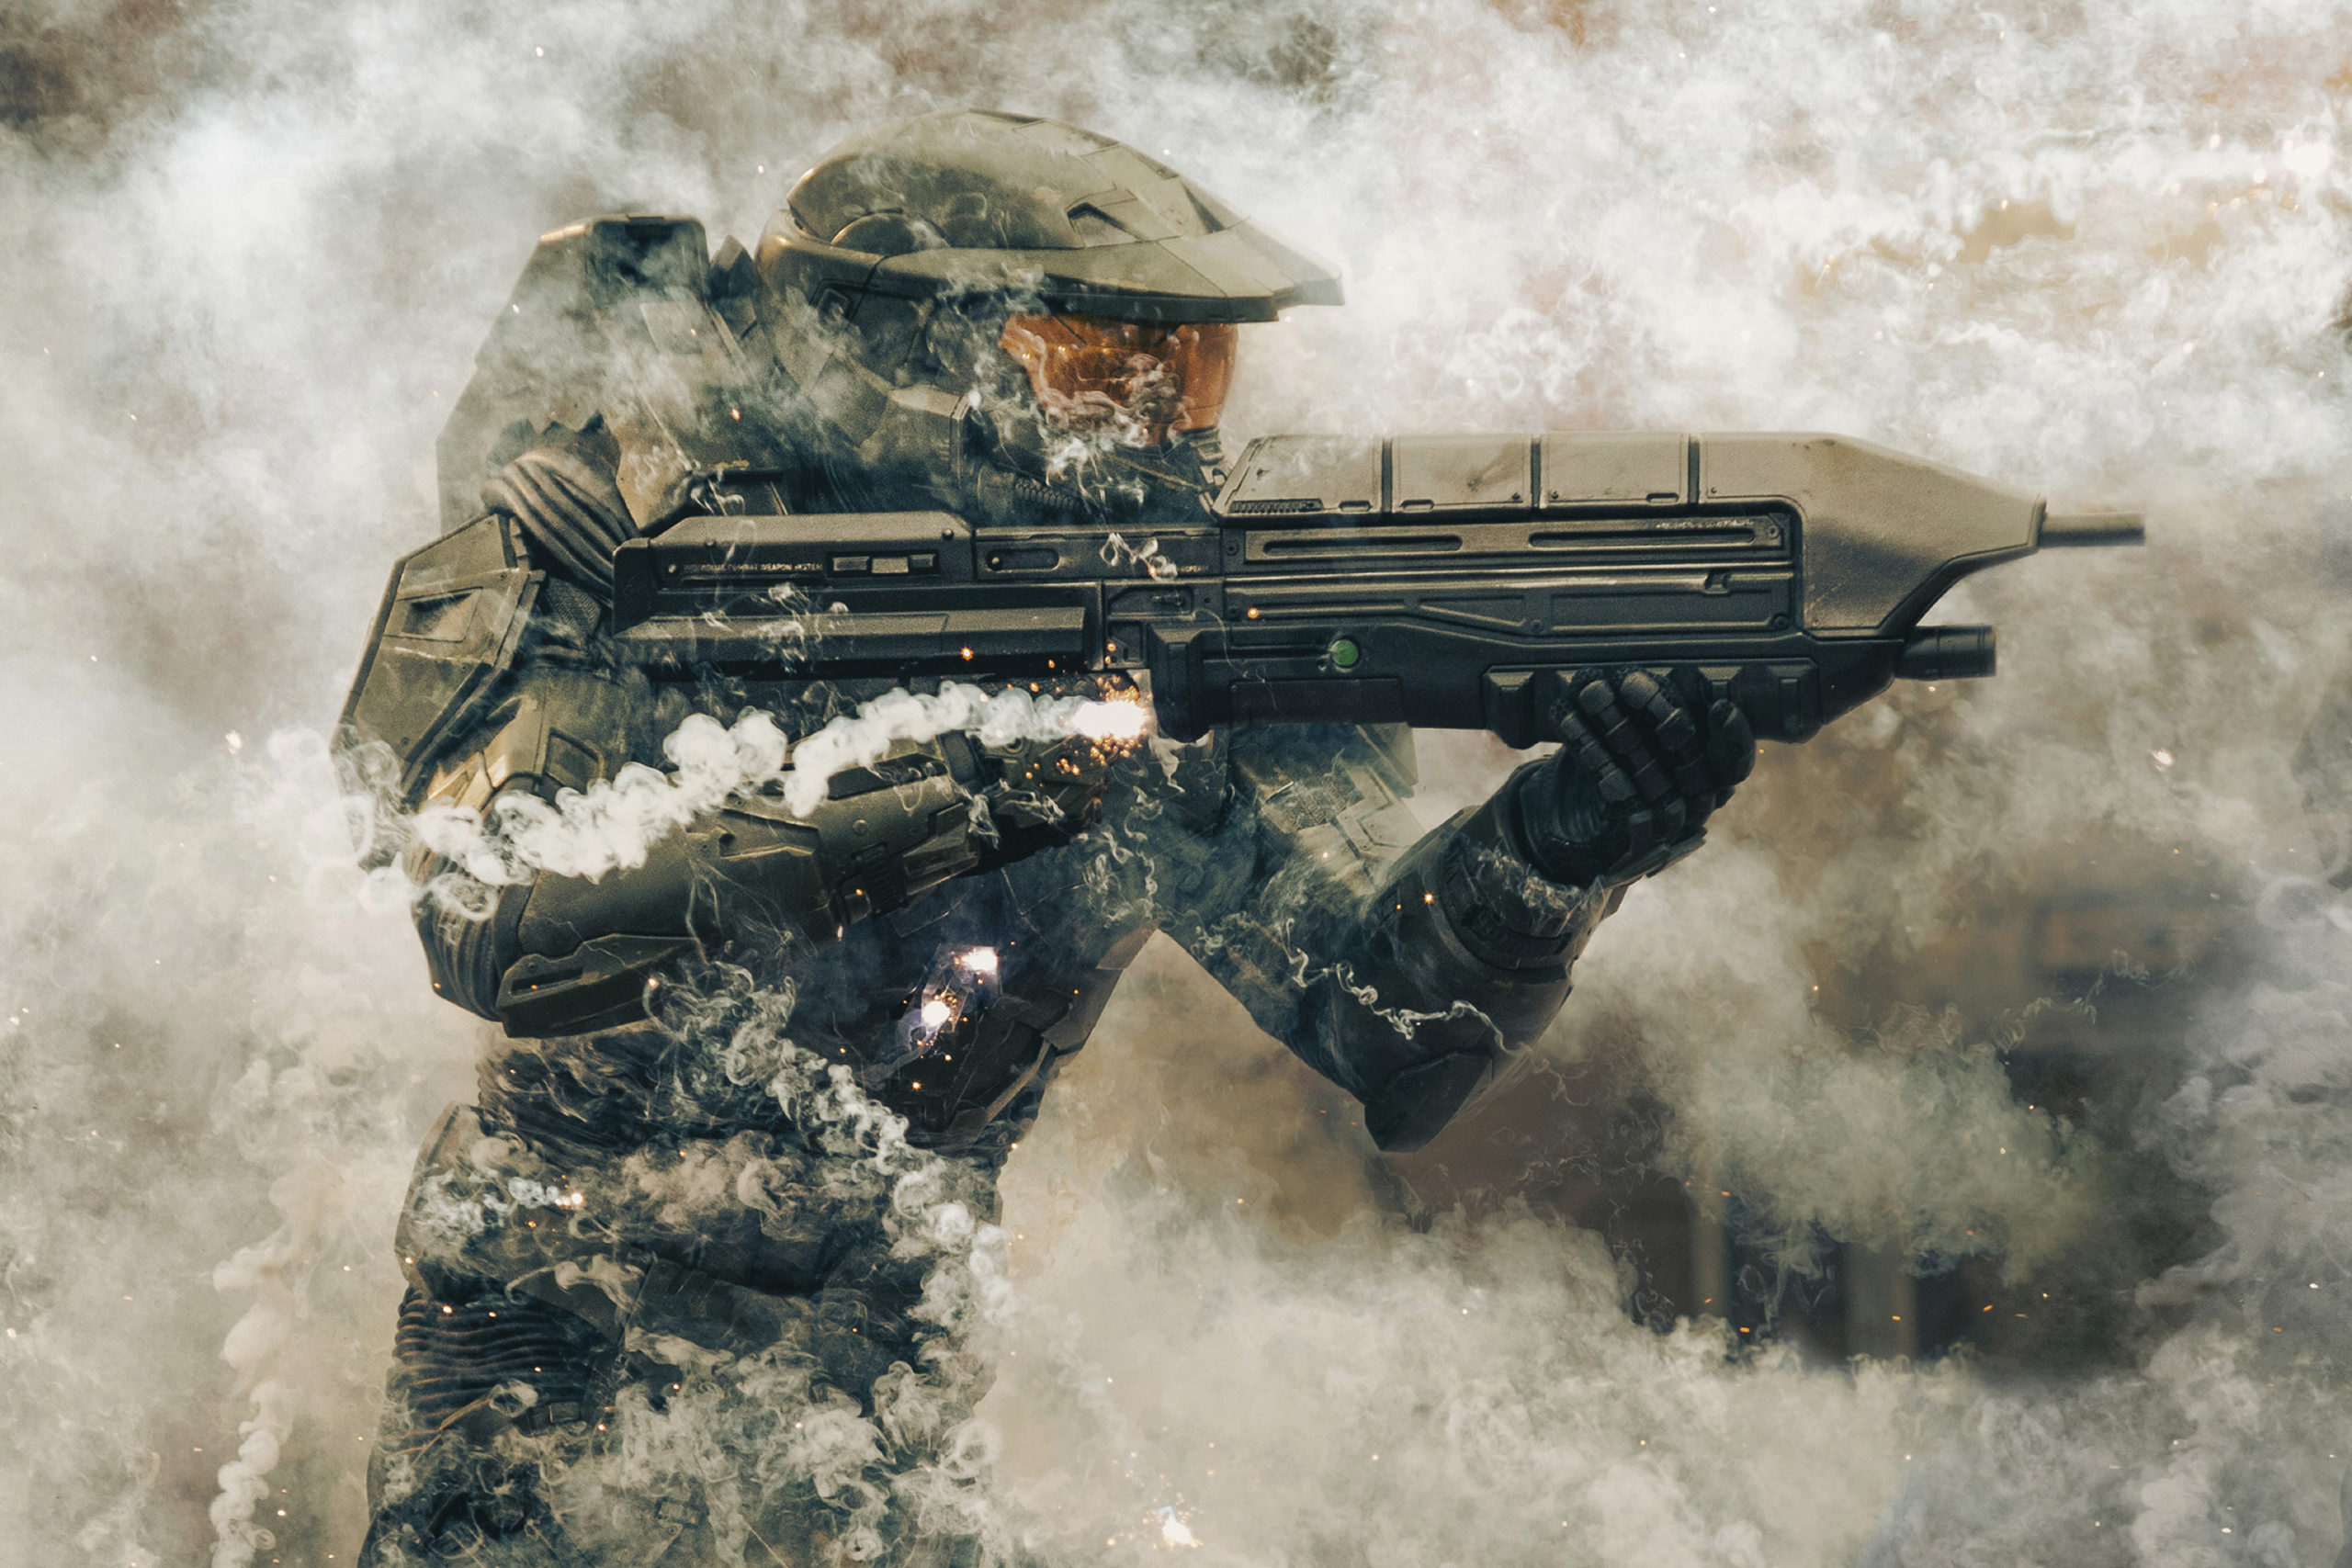 A Spartan aims his assault rifle with smoke everywhere